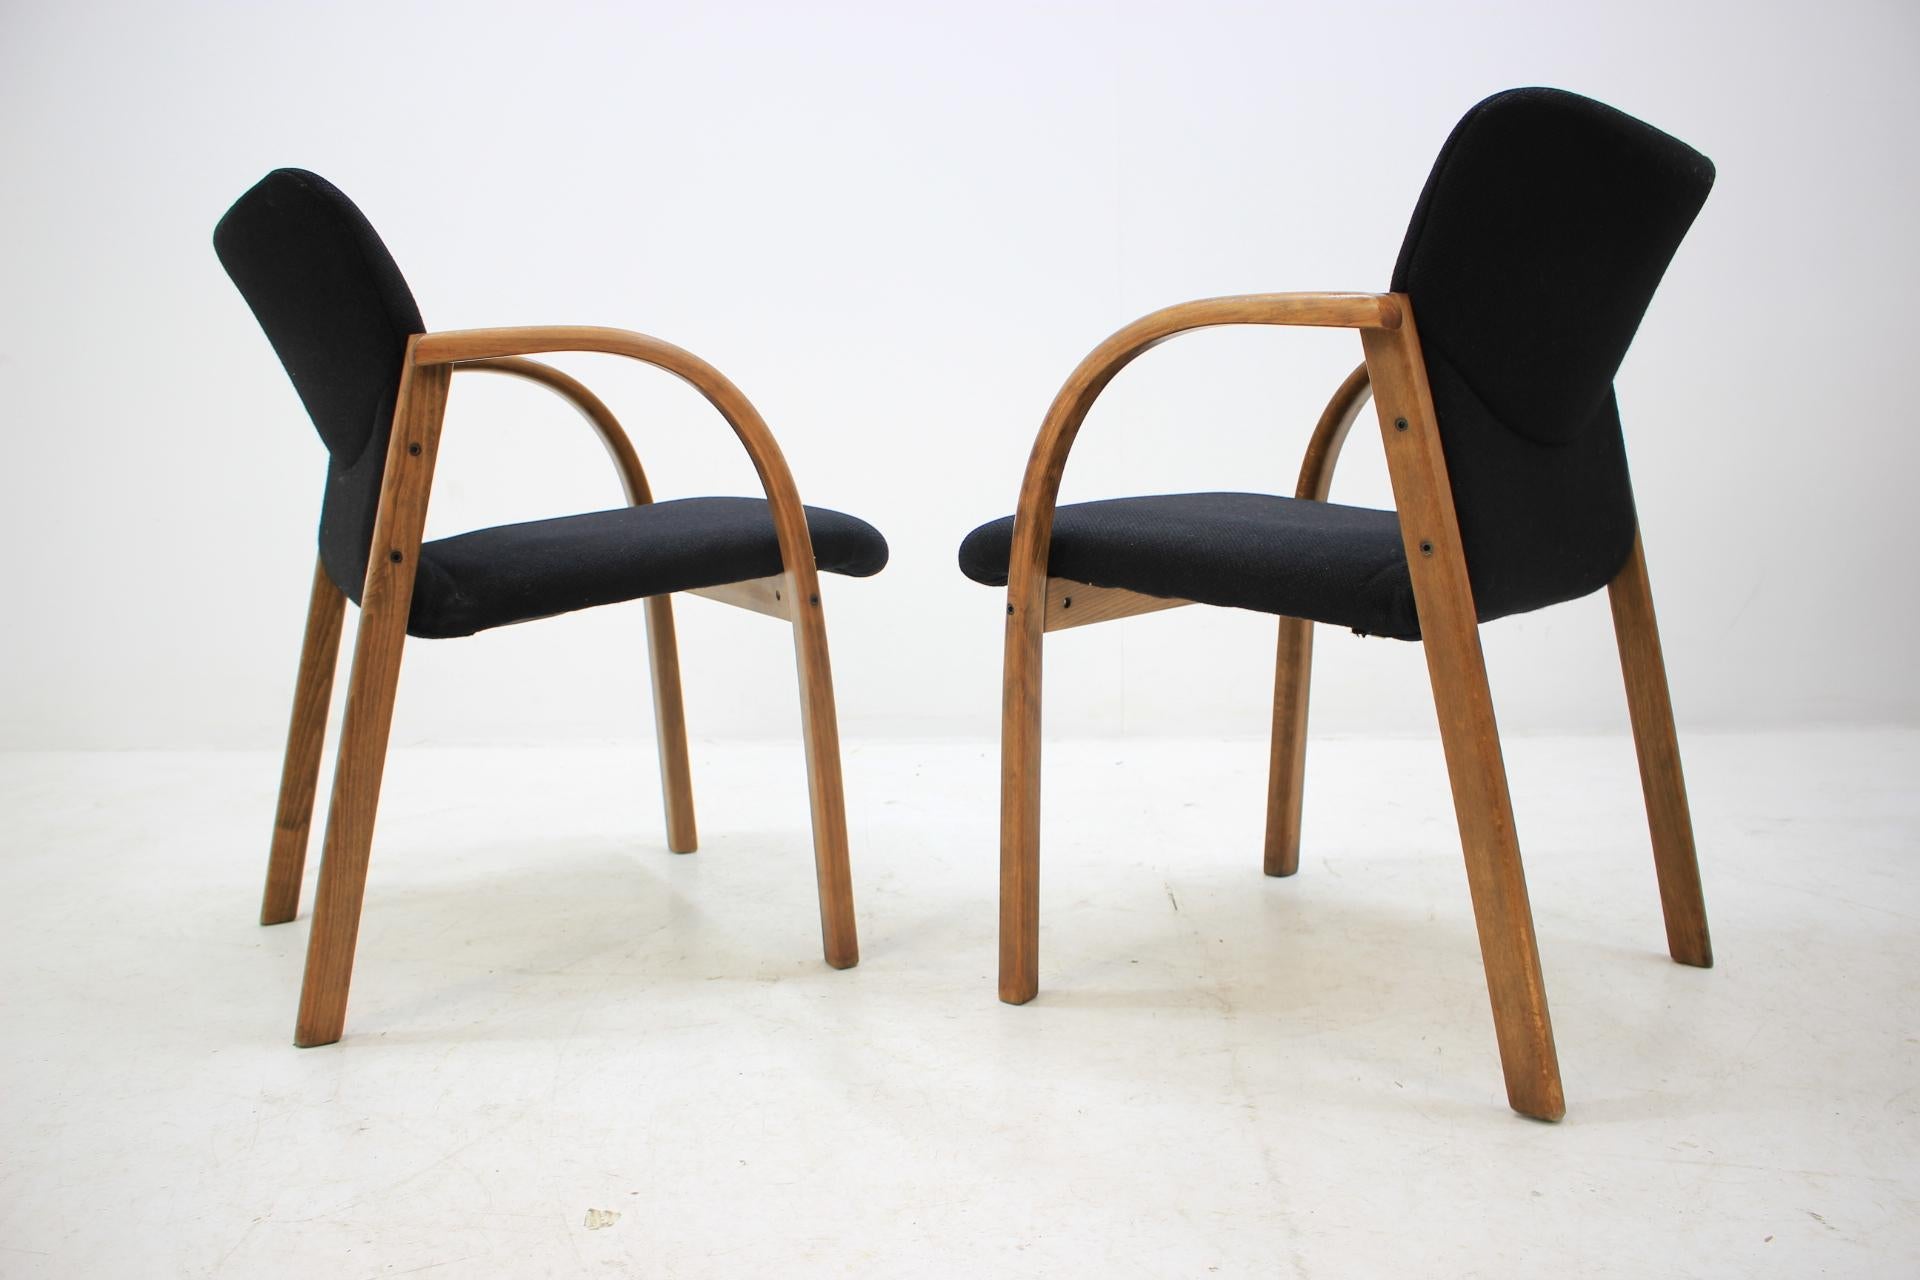 Czech Pair of Design Office / Chairs, 1980s For Sale